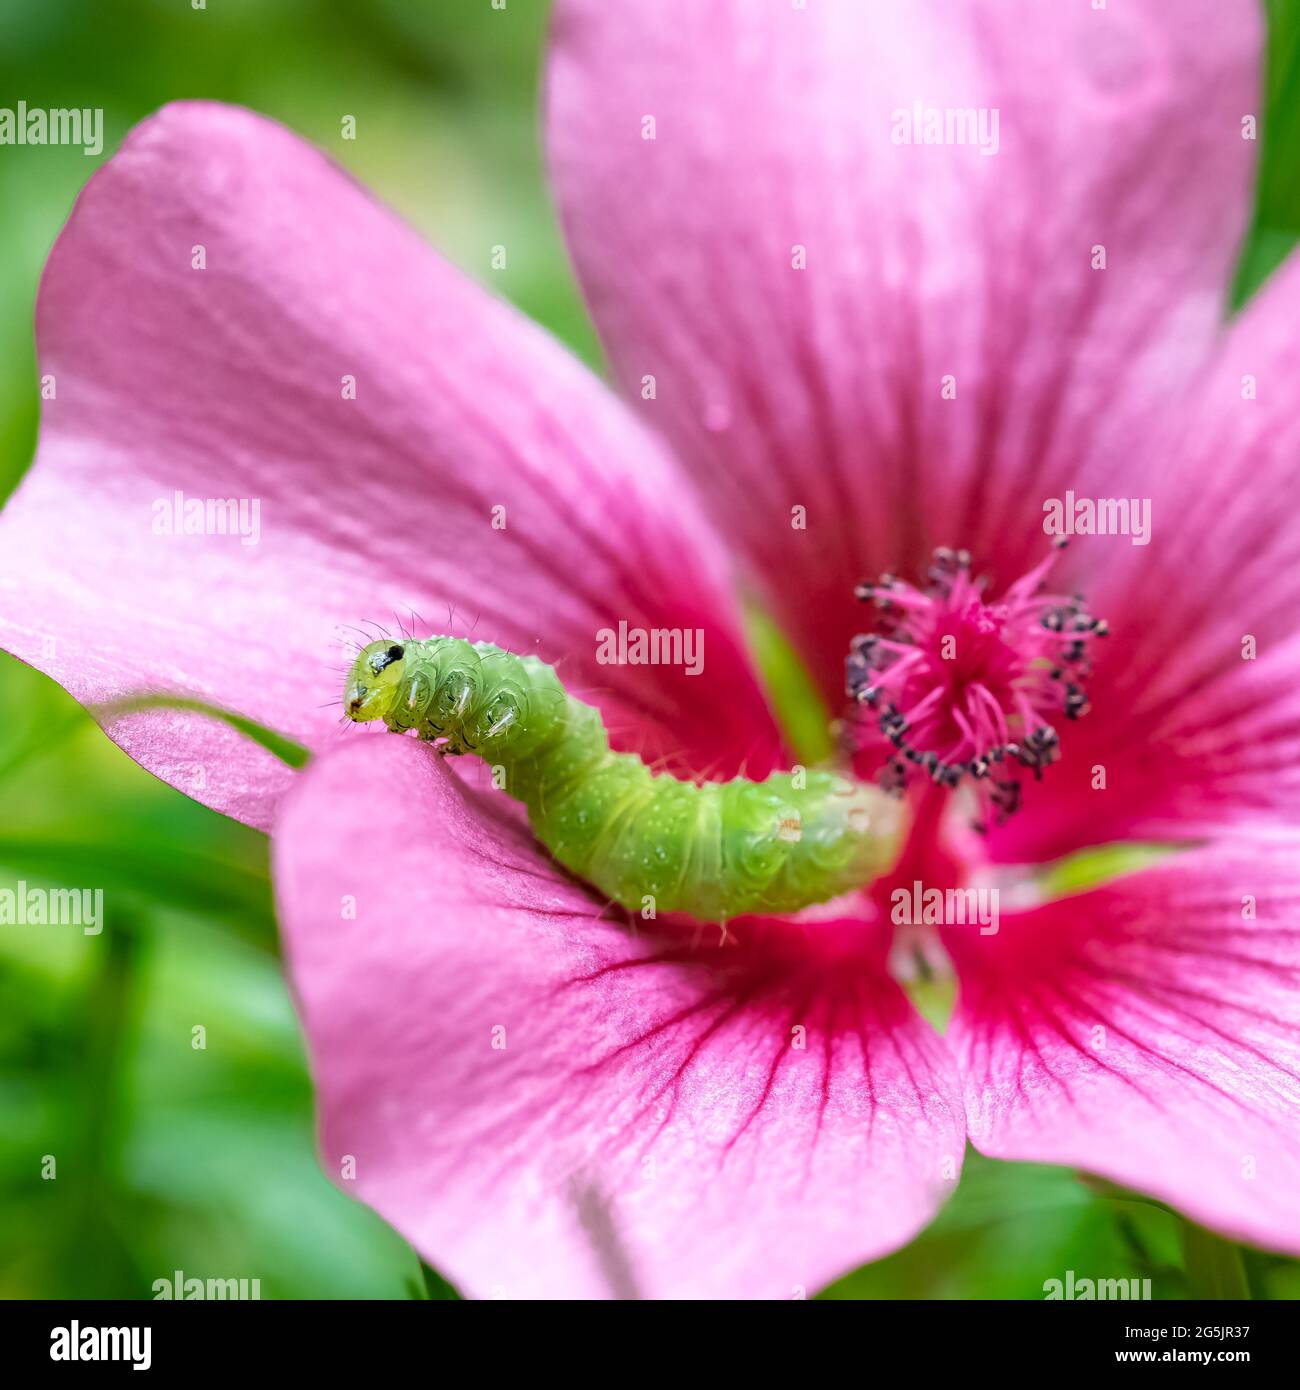 A green caterpillar eating a pink flower, colorful insect in the garden Stock Photo